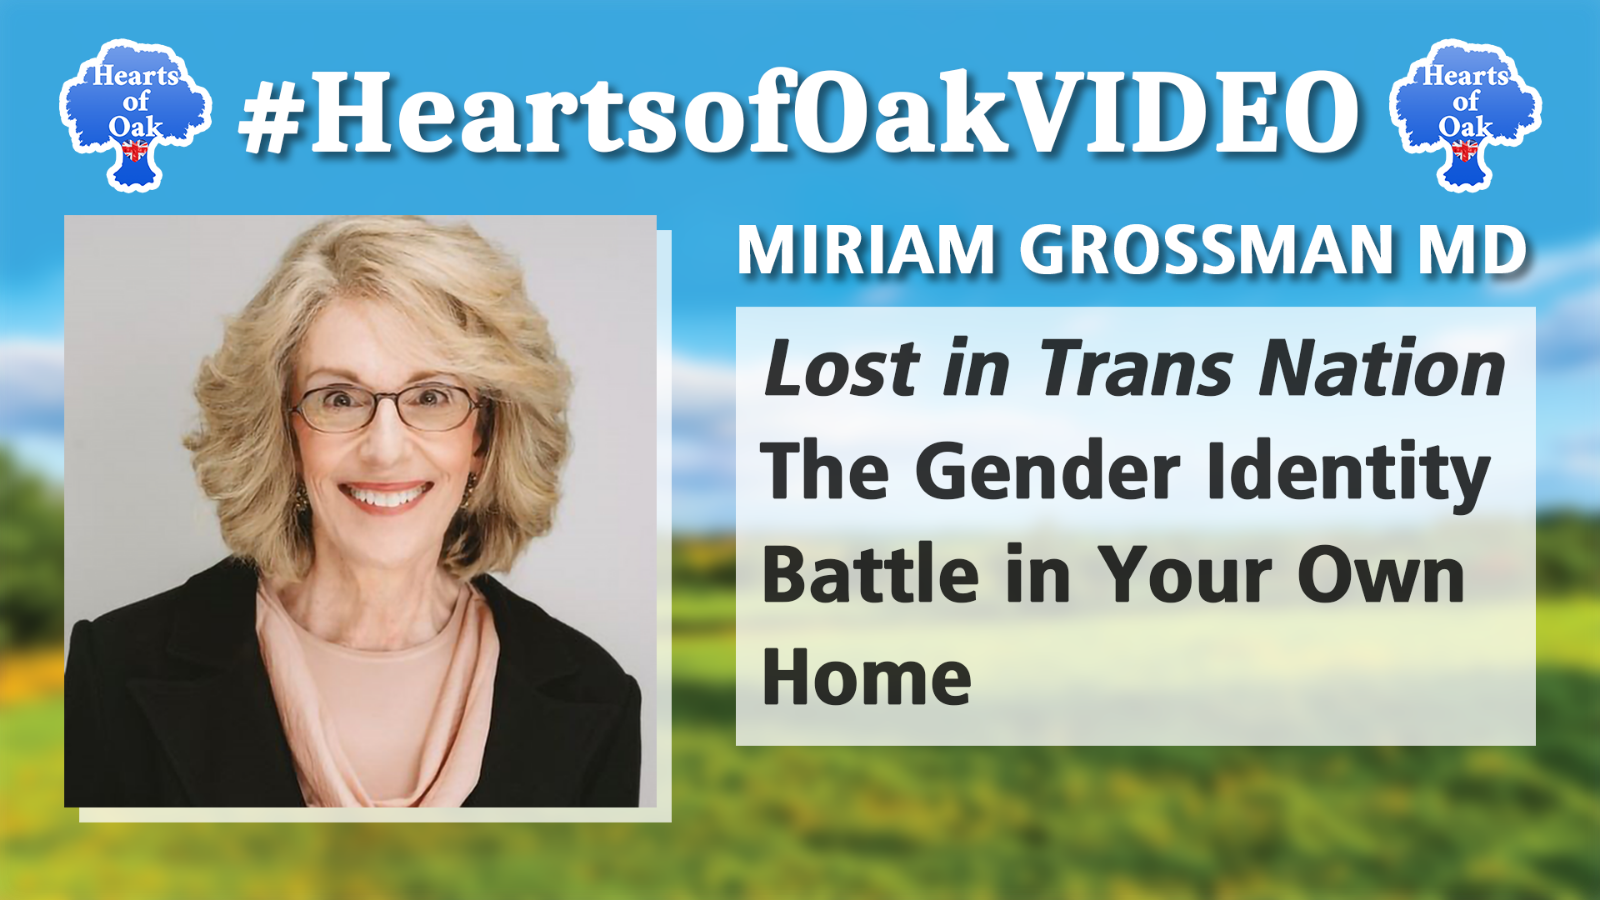 Miriam Grossman MD - Lost in Trans Nation: The Gender Identity Battle in Your Own Home